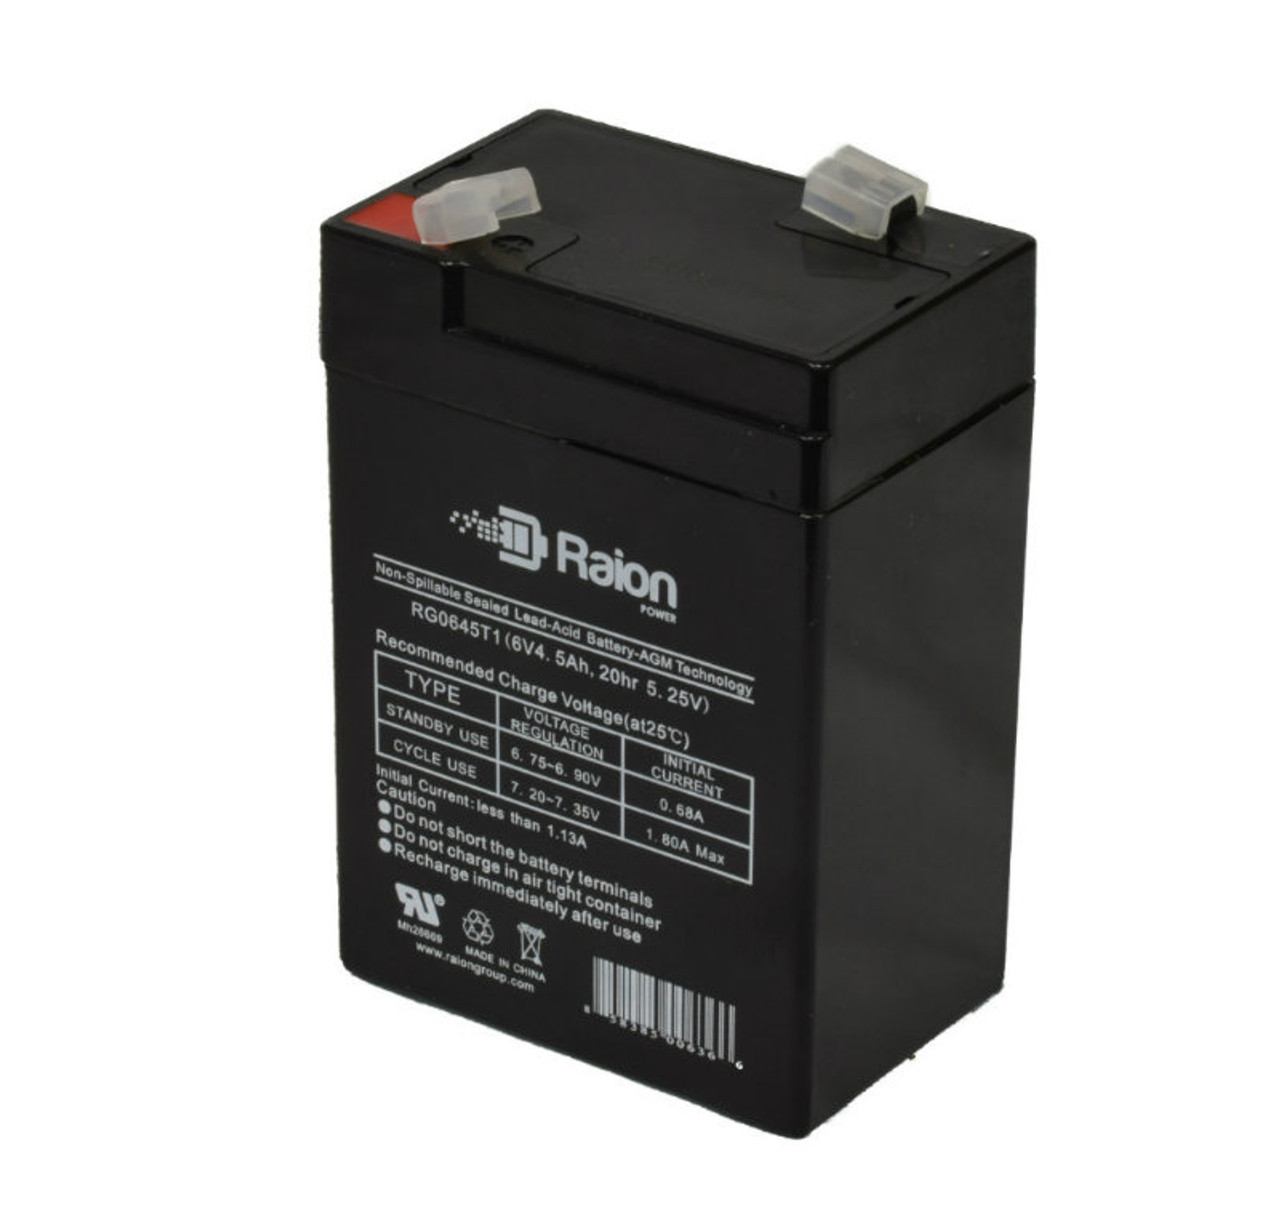 Raion Power RG0645T1 6V 4.5Ah Replacement Battery Cartridge for Criticare Systems 502